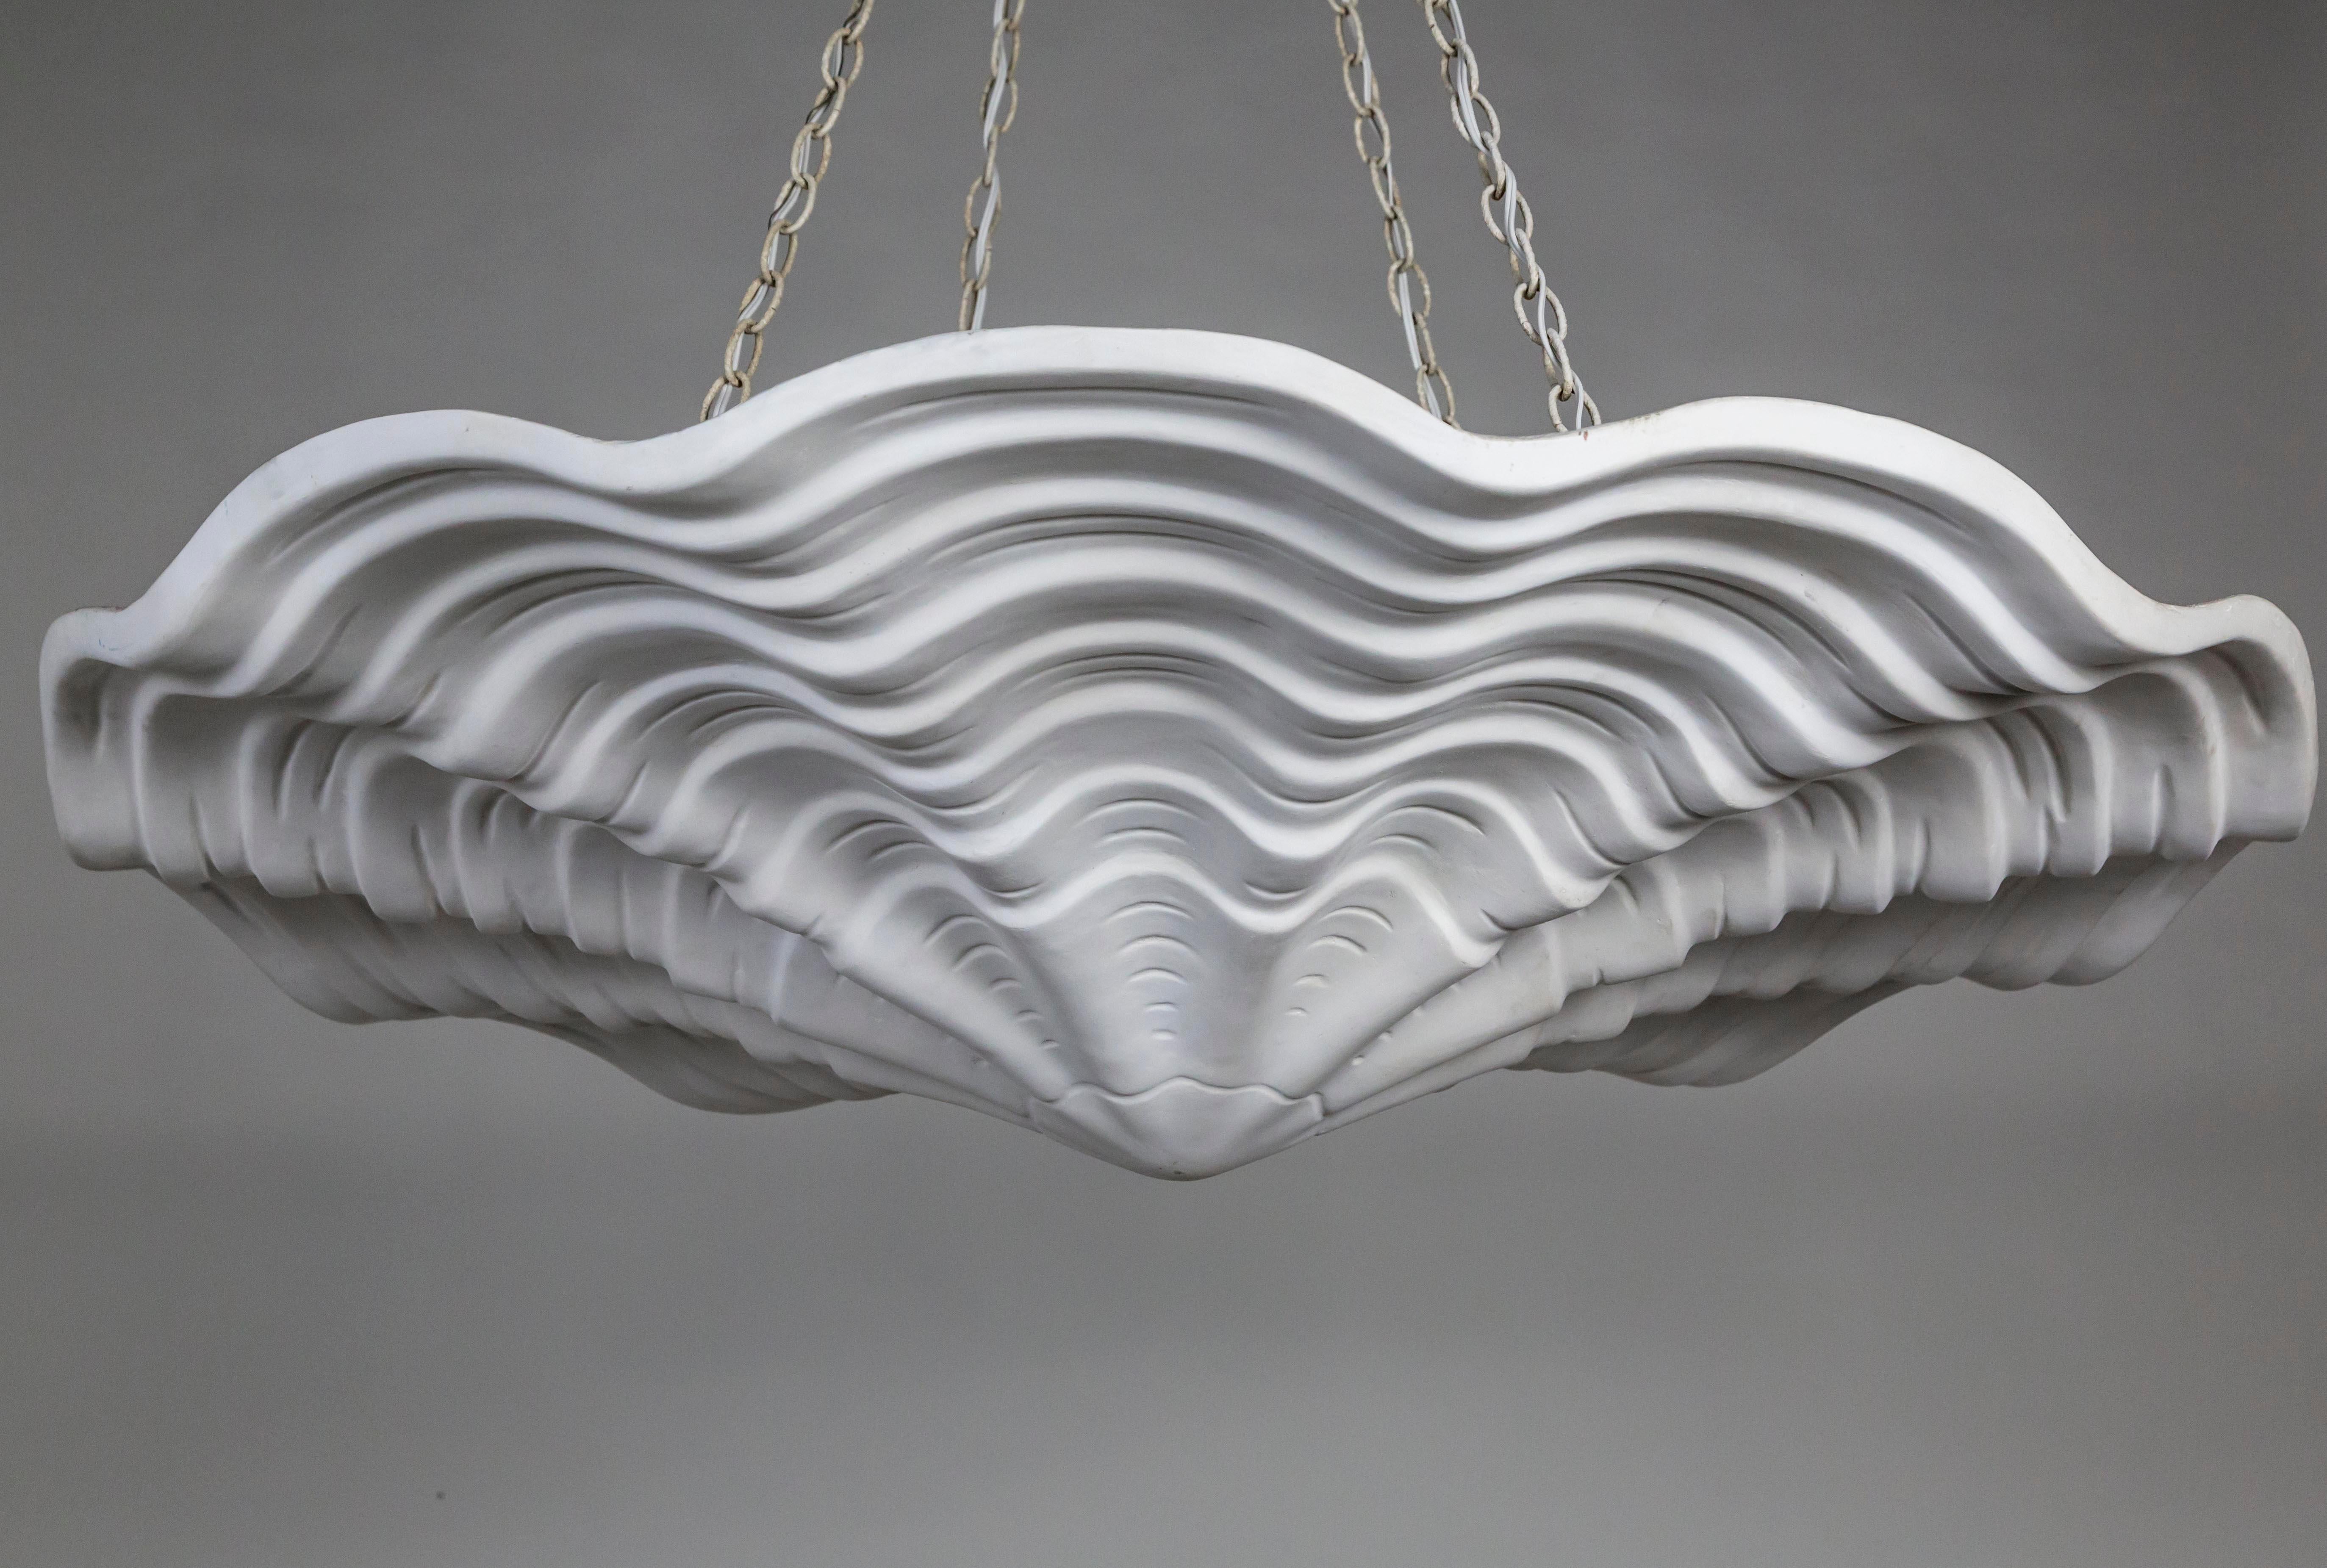 A lacquered plaster pendant in an undulating shell shape, with scalloped edges and imprinted lines accentuating the form. A newer take on Francis Elkins's 1940s plaster plafonnier. Hanging by four chains; with 4 medium base ceramic sockets.